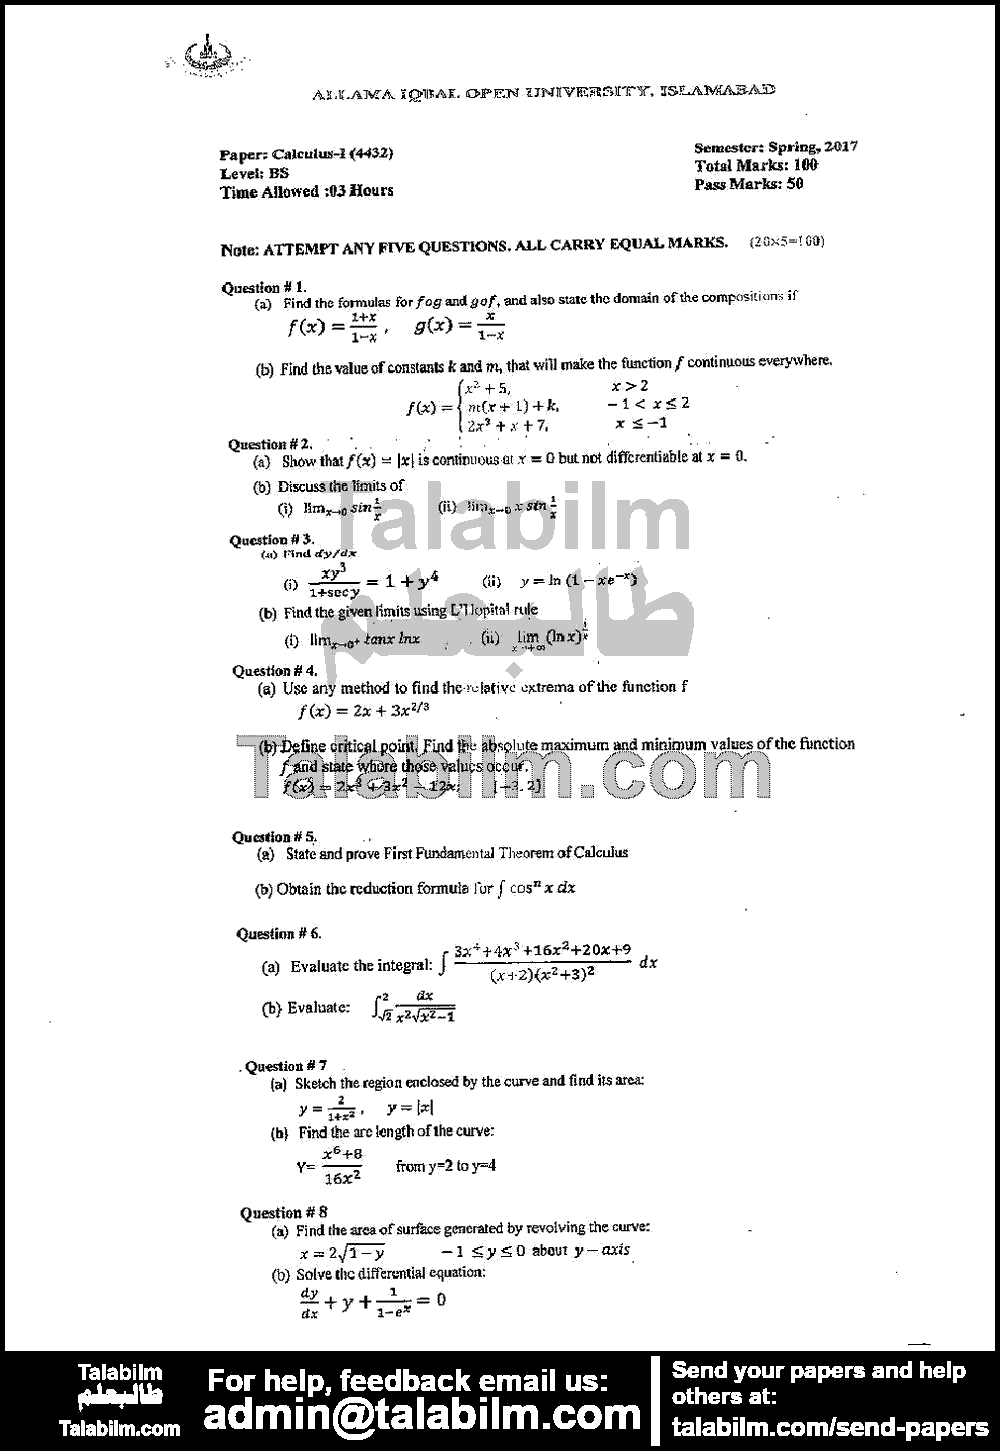 Calculus-I 4432 past paper for Spring 2017